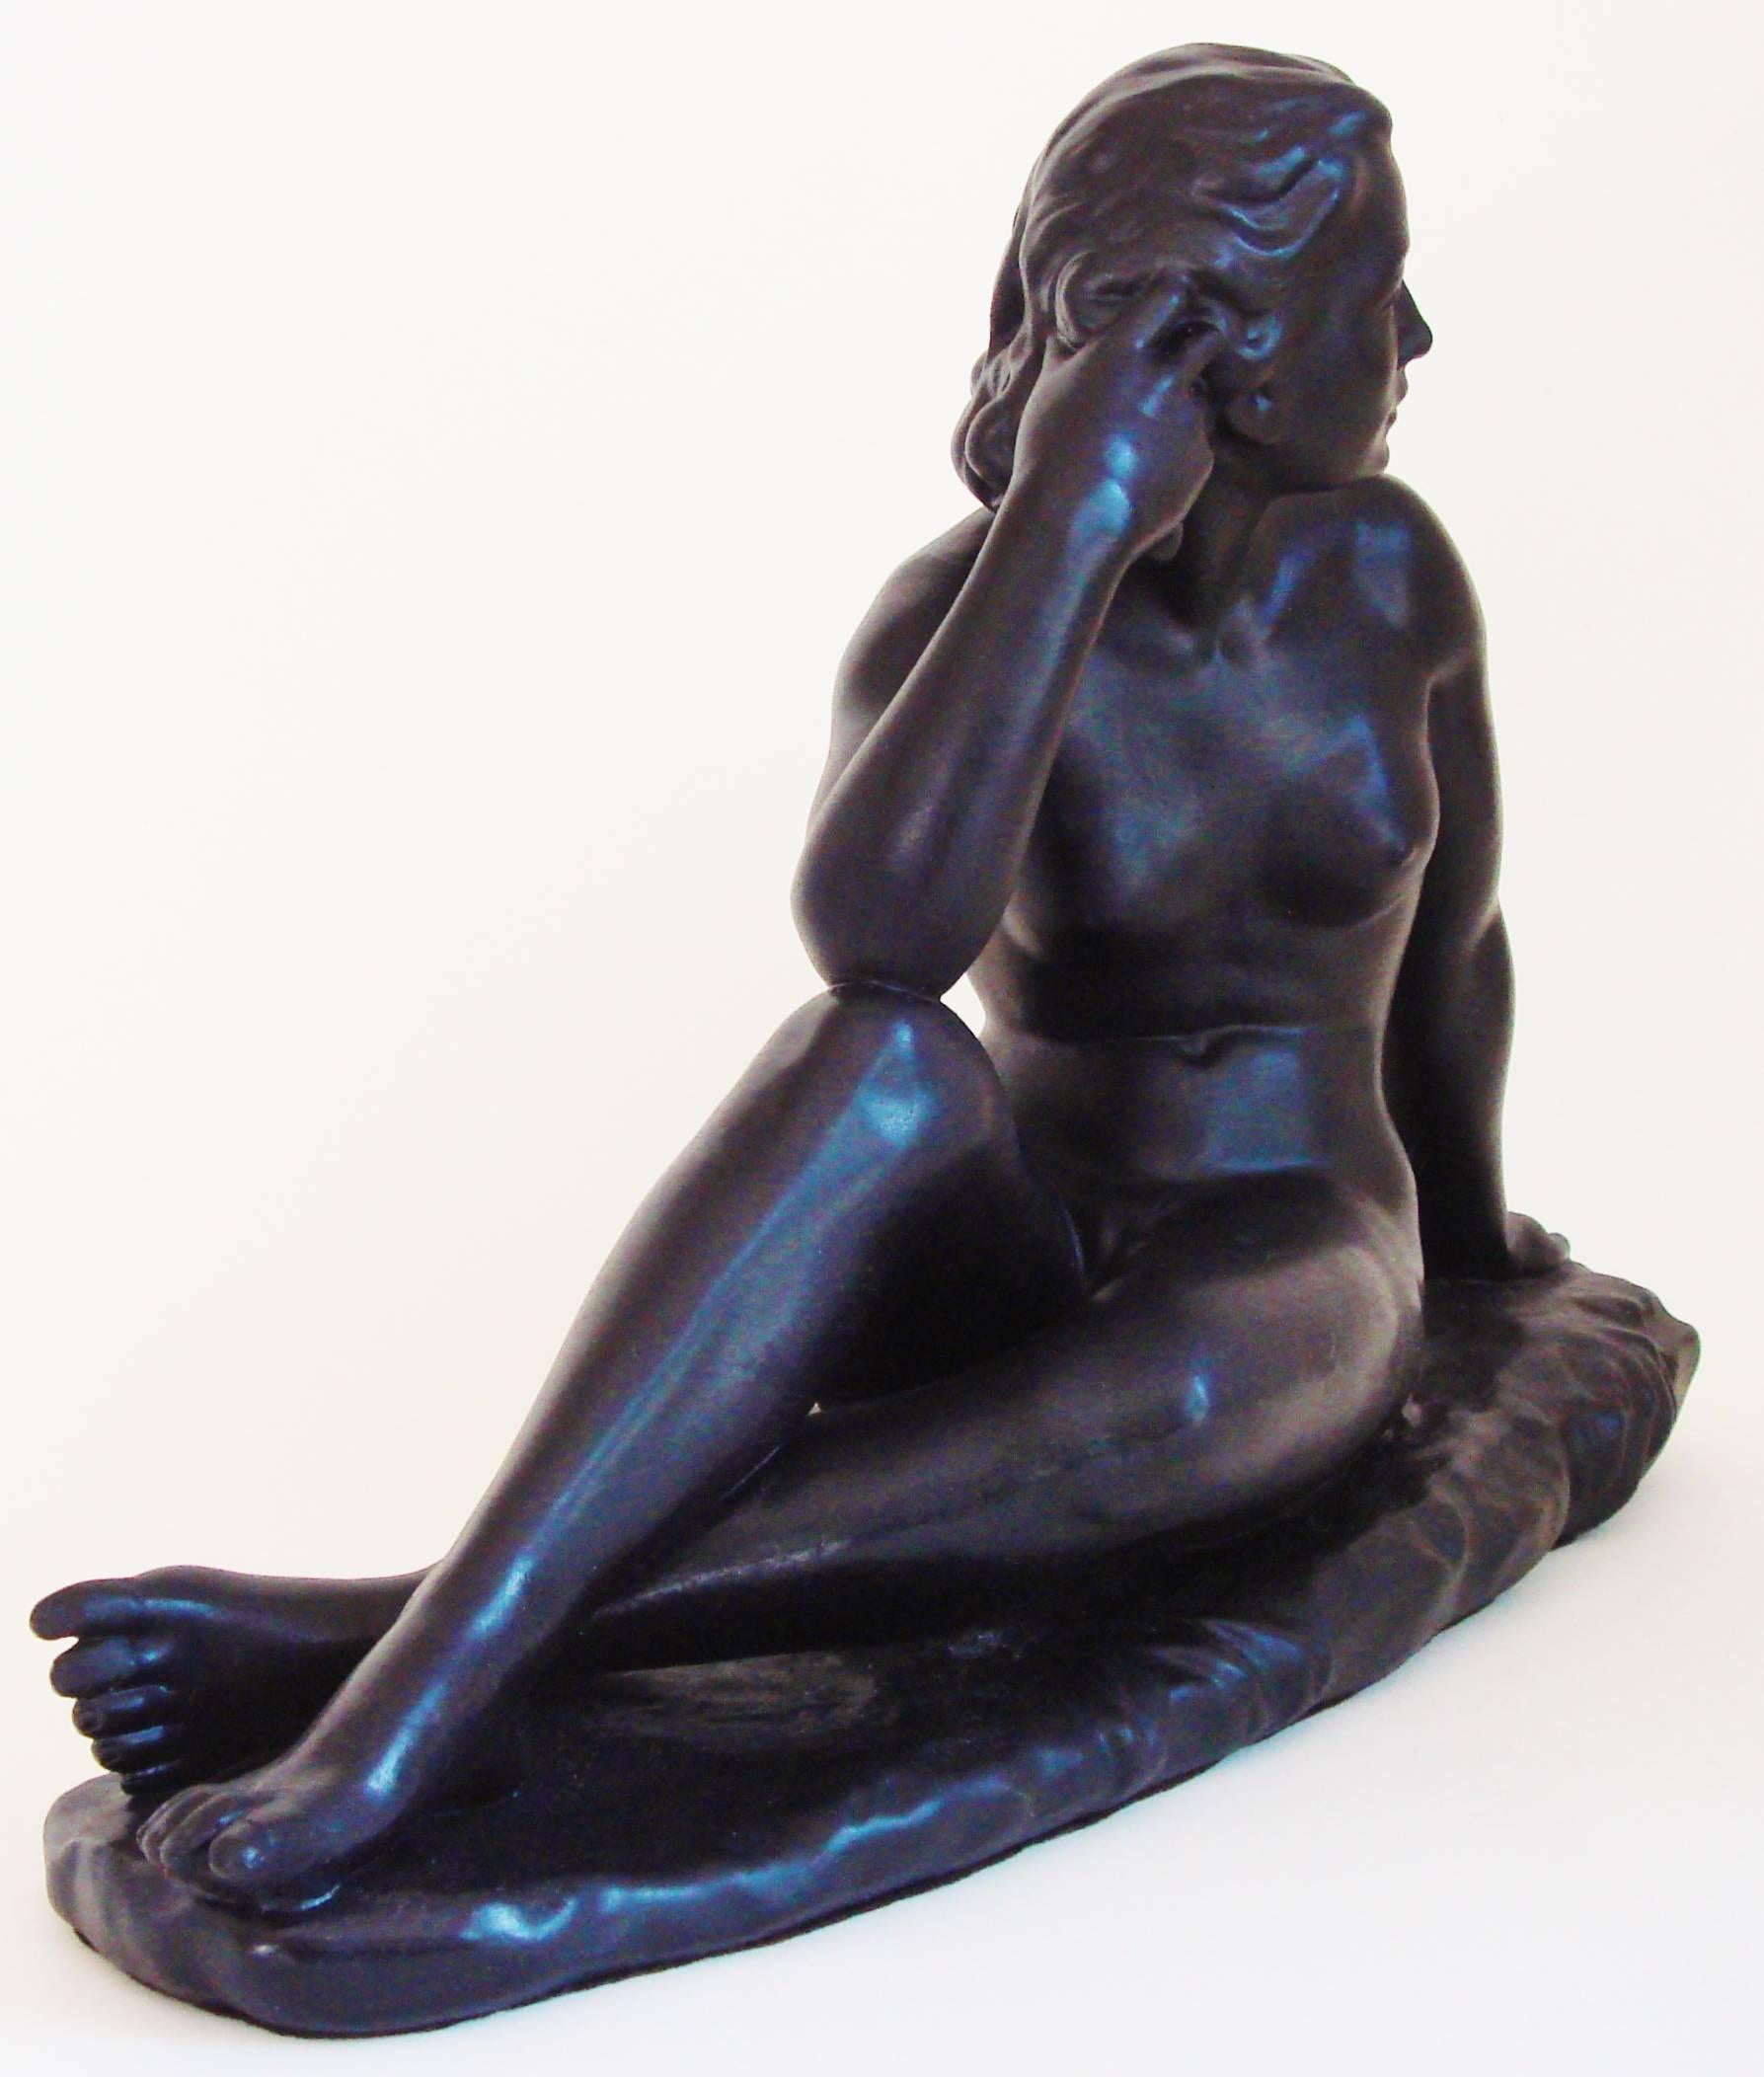 This exquisite Canadian Mid-Century female seated nude was created by Jackir Studios of Toronto in 1965. It is executed in plaster and has no chips or cracks plus all paint is original. We have included pictures taken at all angles plus close ups of